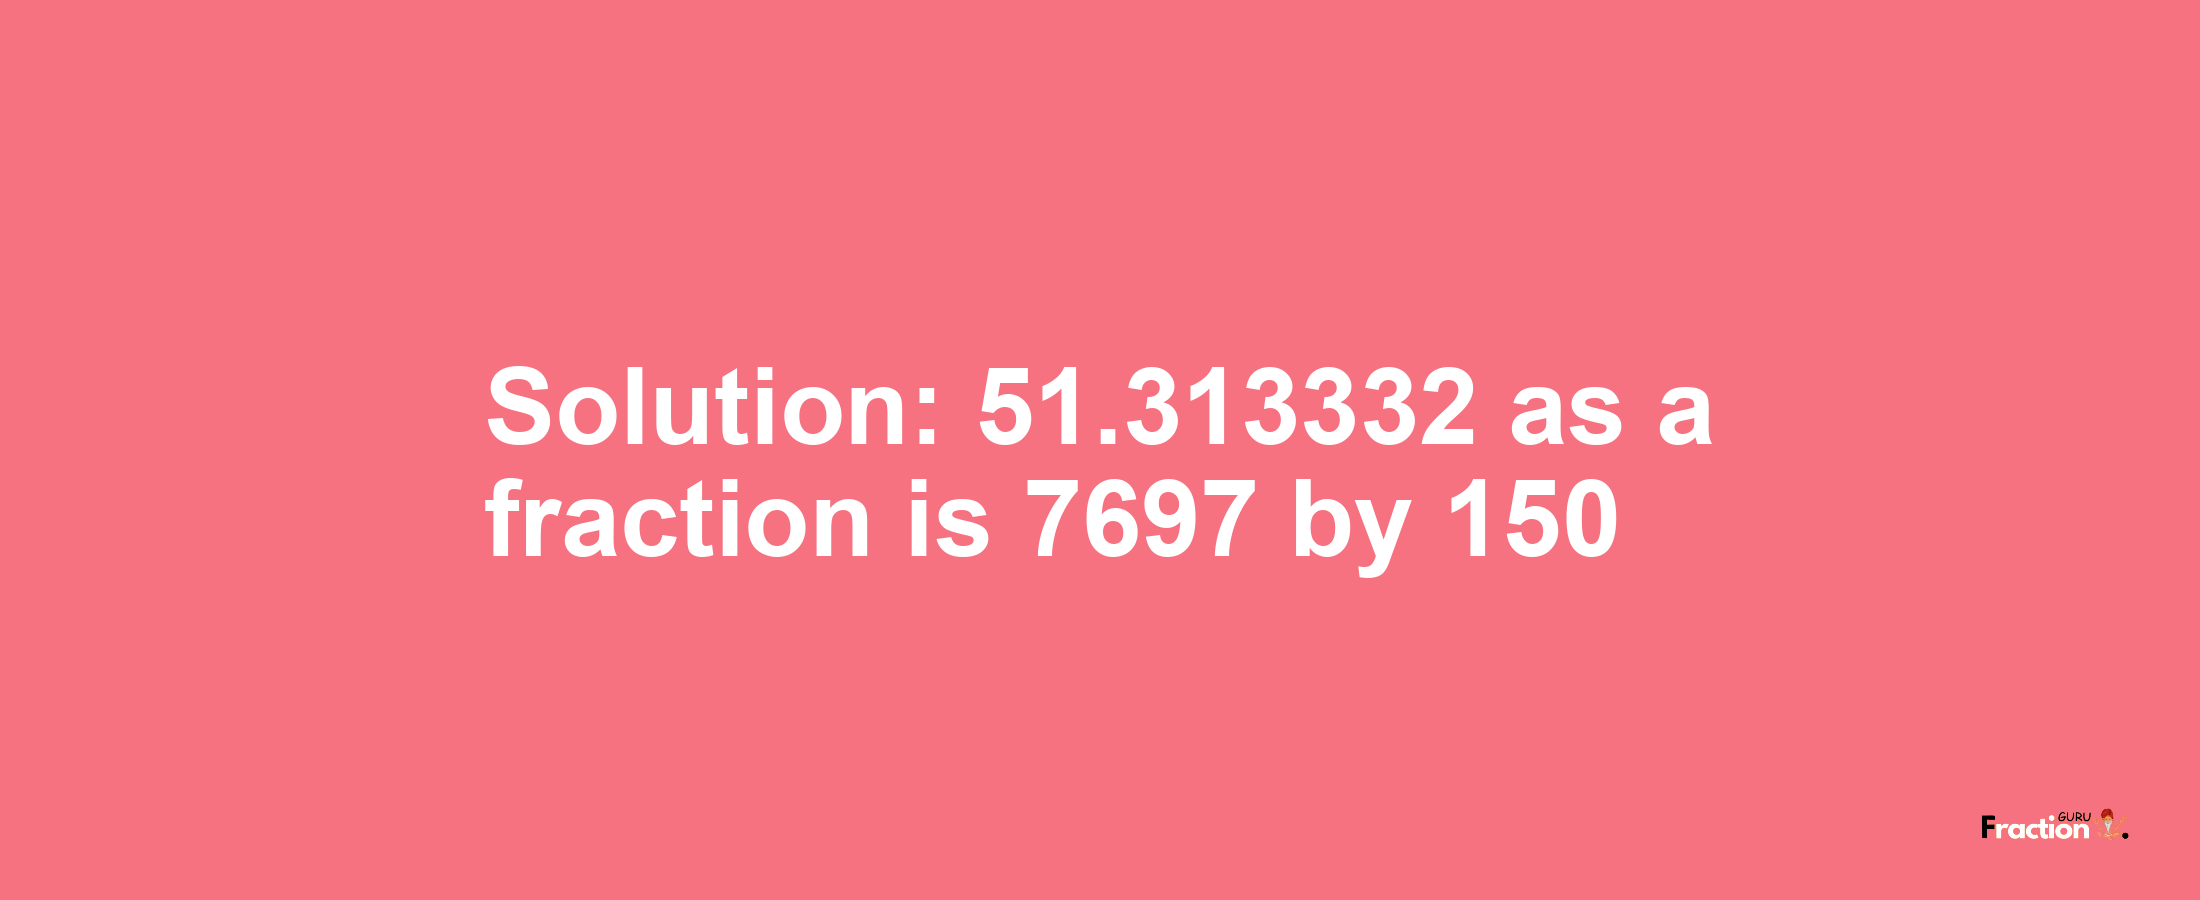 Solution:51.313332 as a fraction is 7697/150